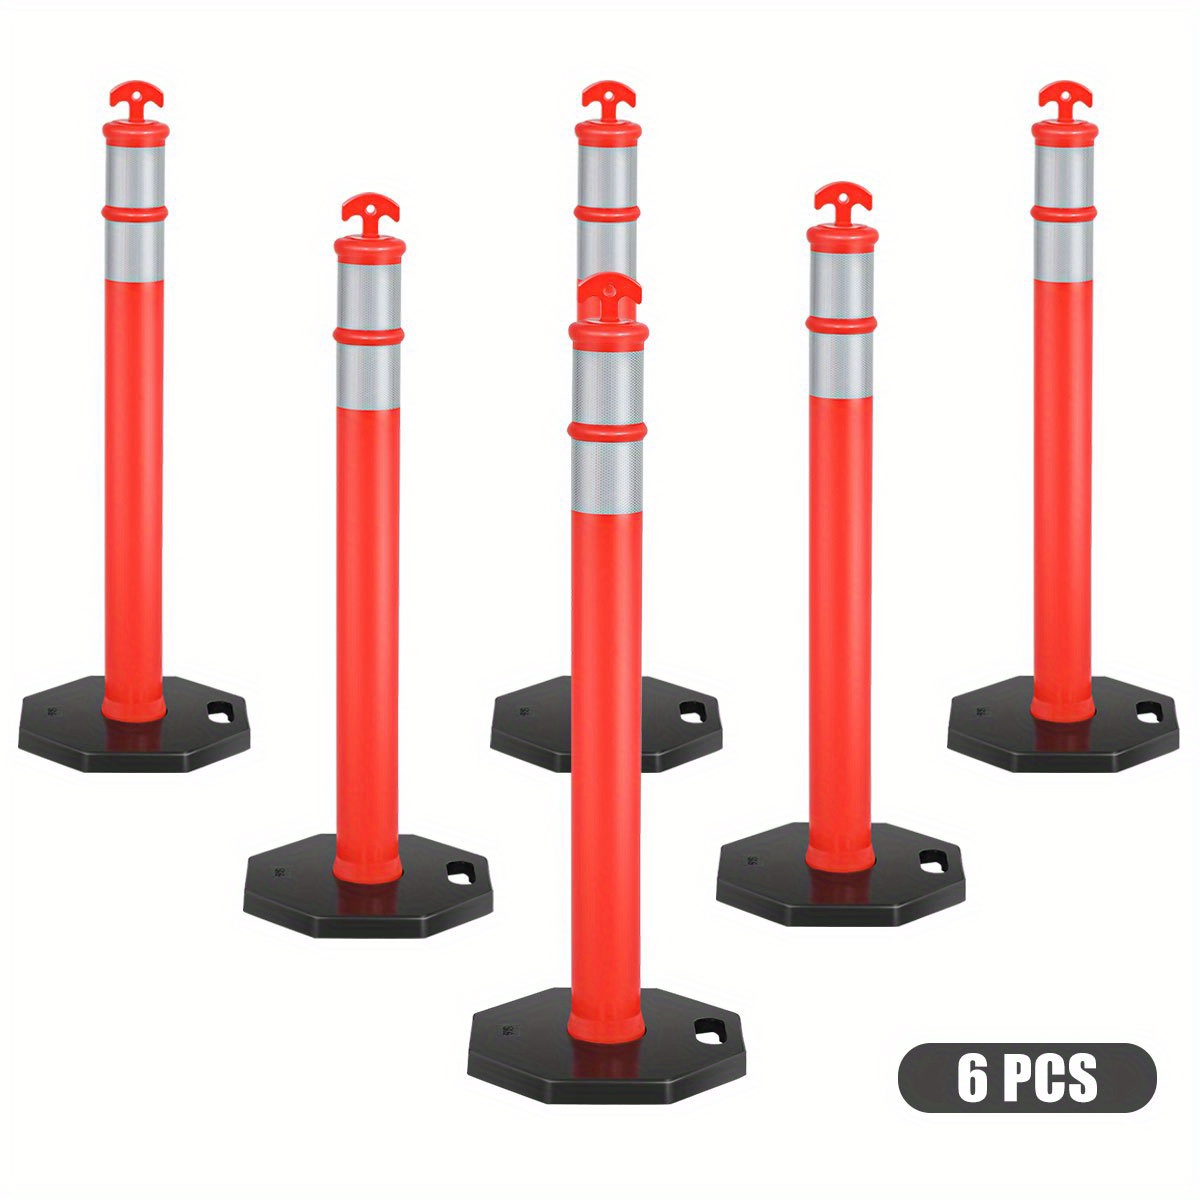 

6 Pack 45" Orange Traffic Delineator Post Cone W/ Rubber Base & Reflective Bands